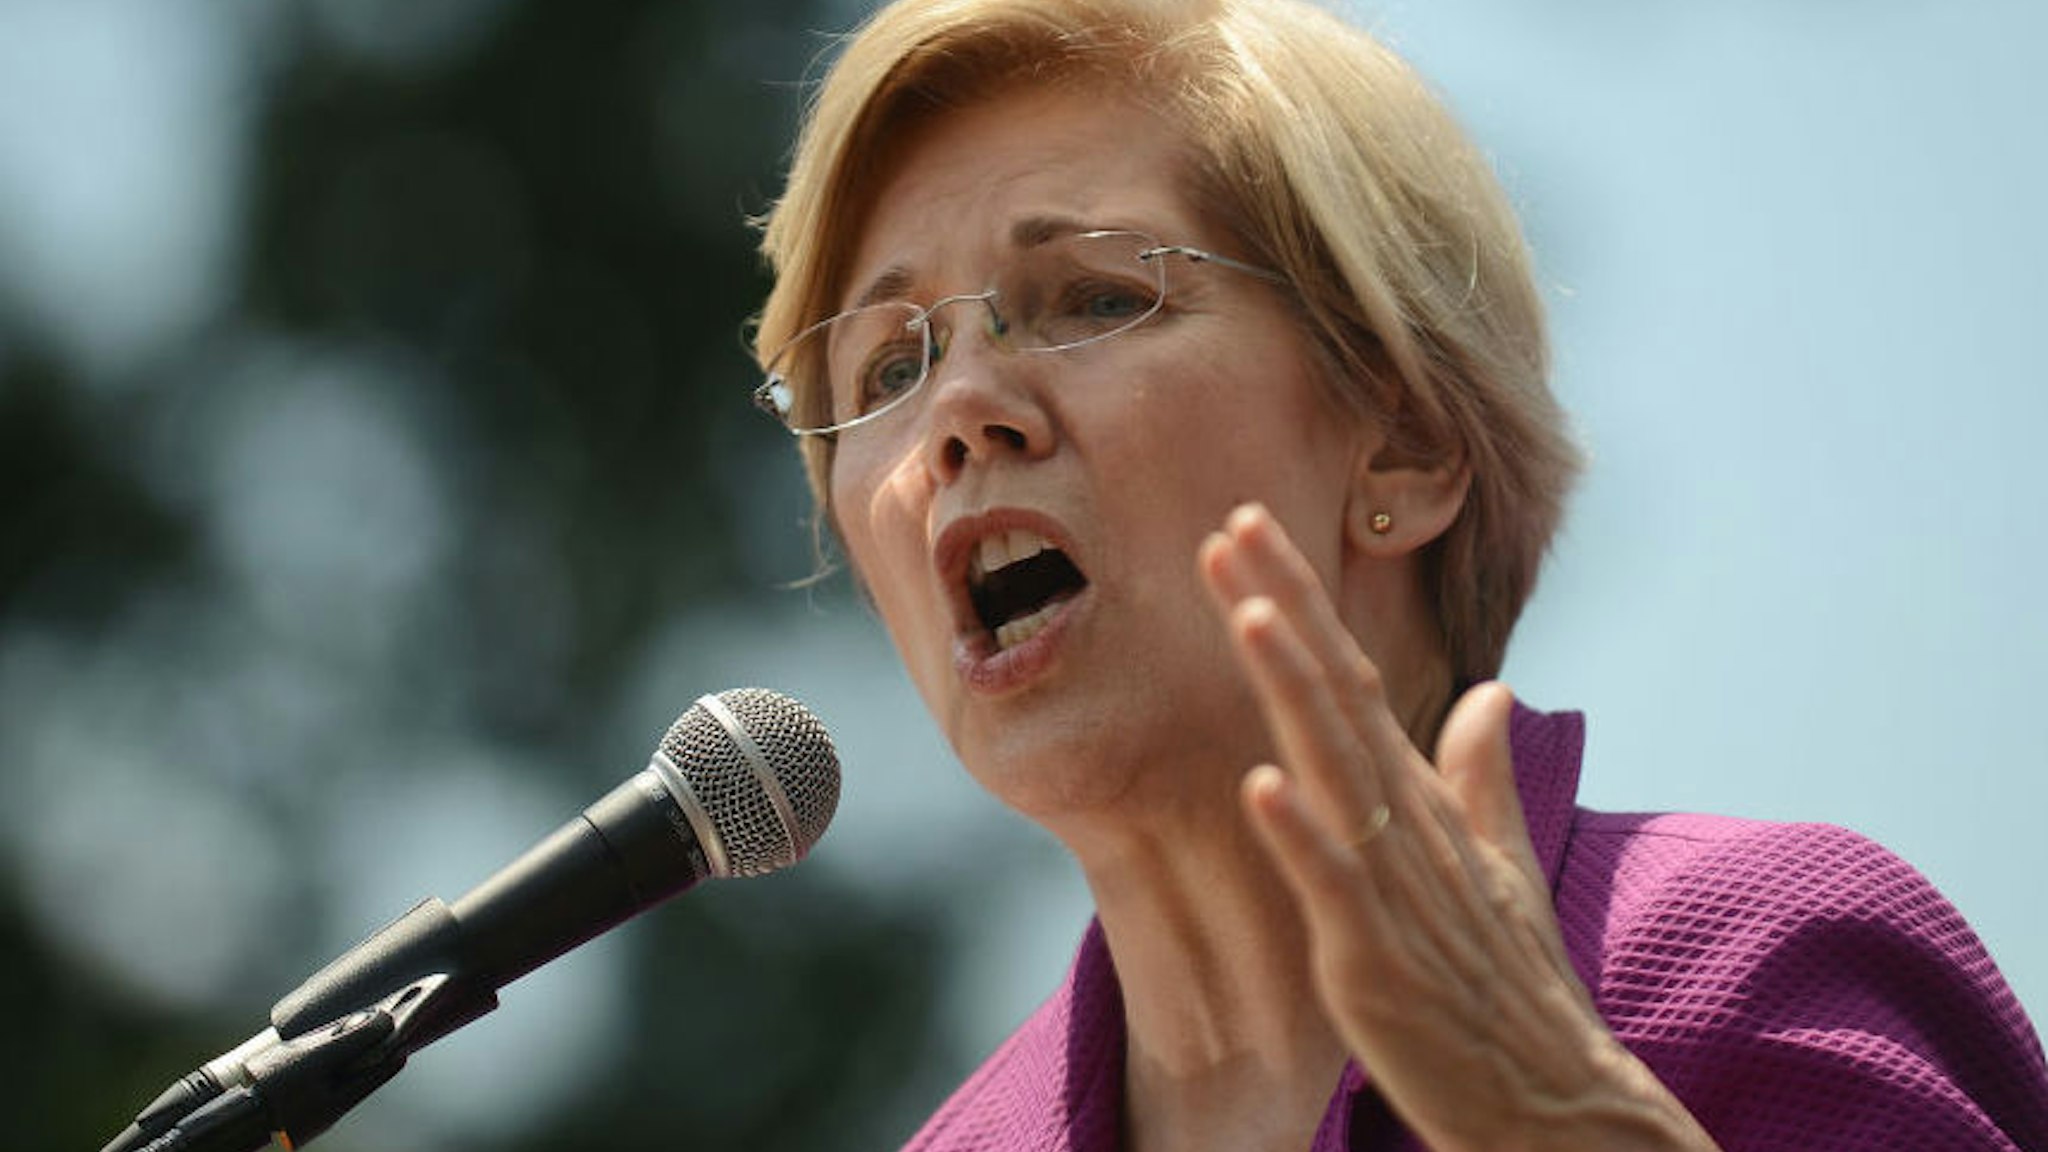 WASHINGTON, DC - JUNE 21: U.S. Sen. Elizabeth Warren (D-MA) speaks at a rally to oppose the repeal of the Affordable Care Act and its replacement on Capitol Hill on June 21, 2017 in Washington, DC.